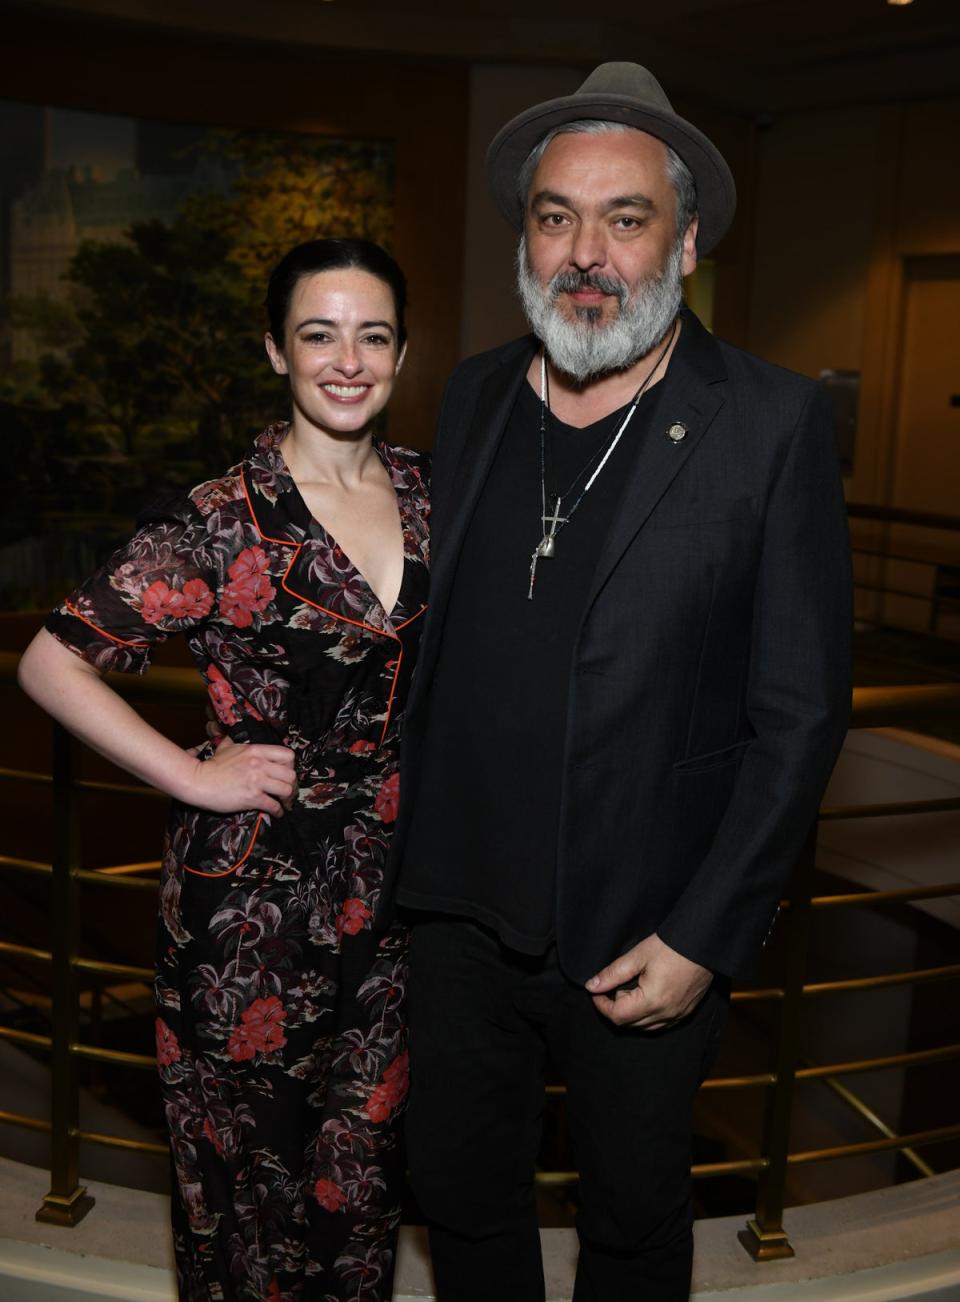 Laura Donnelly and Jez Butterworth at a Tony nominees event in 2019 (Getty Images for Tony Awards Pro)